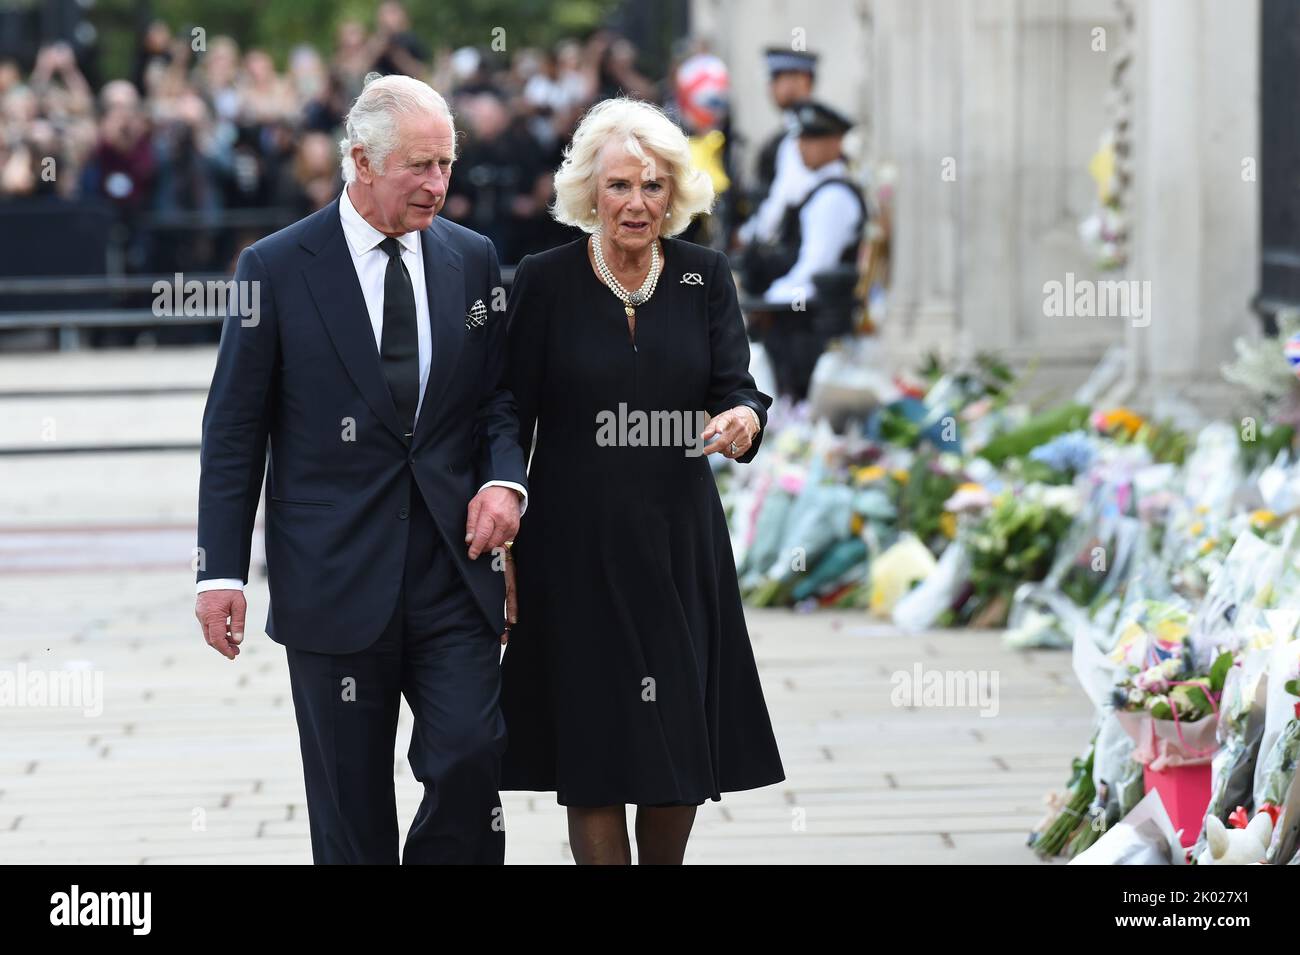 London, UK. 9th Sep, 2022. King Charles lll and the Queen Consort walk outside of Buckingham Palace to view the floral tributes left for his late mother Queen Elizabeth ll who died yesterday and to meet the large assembled crowd of well wishers and mourners. Credit: MARTIN DALTON/Alamy Live News Stock Photo